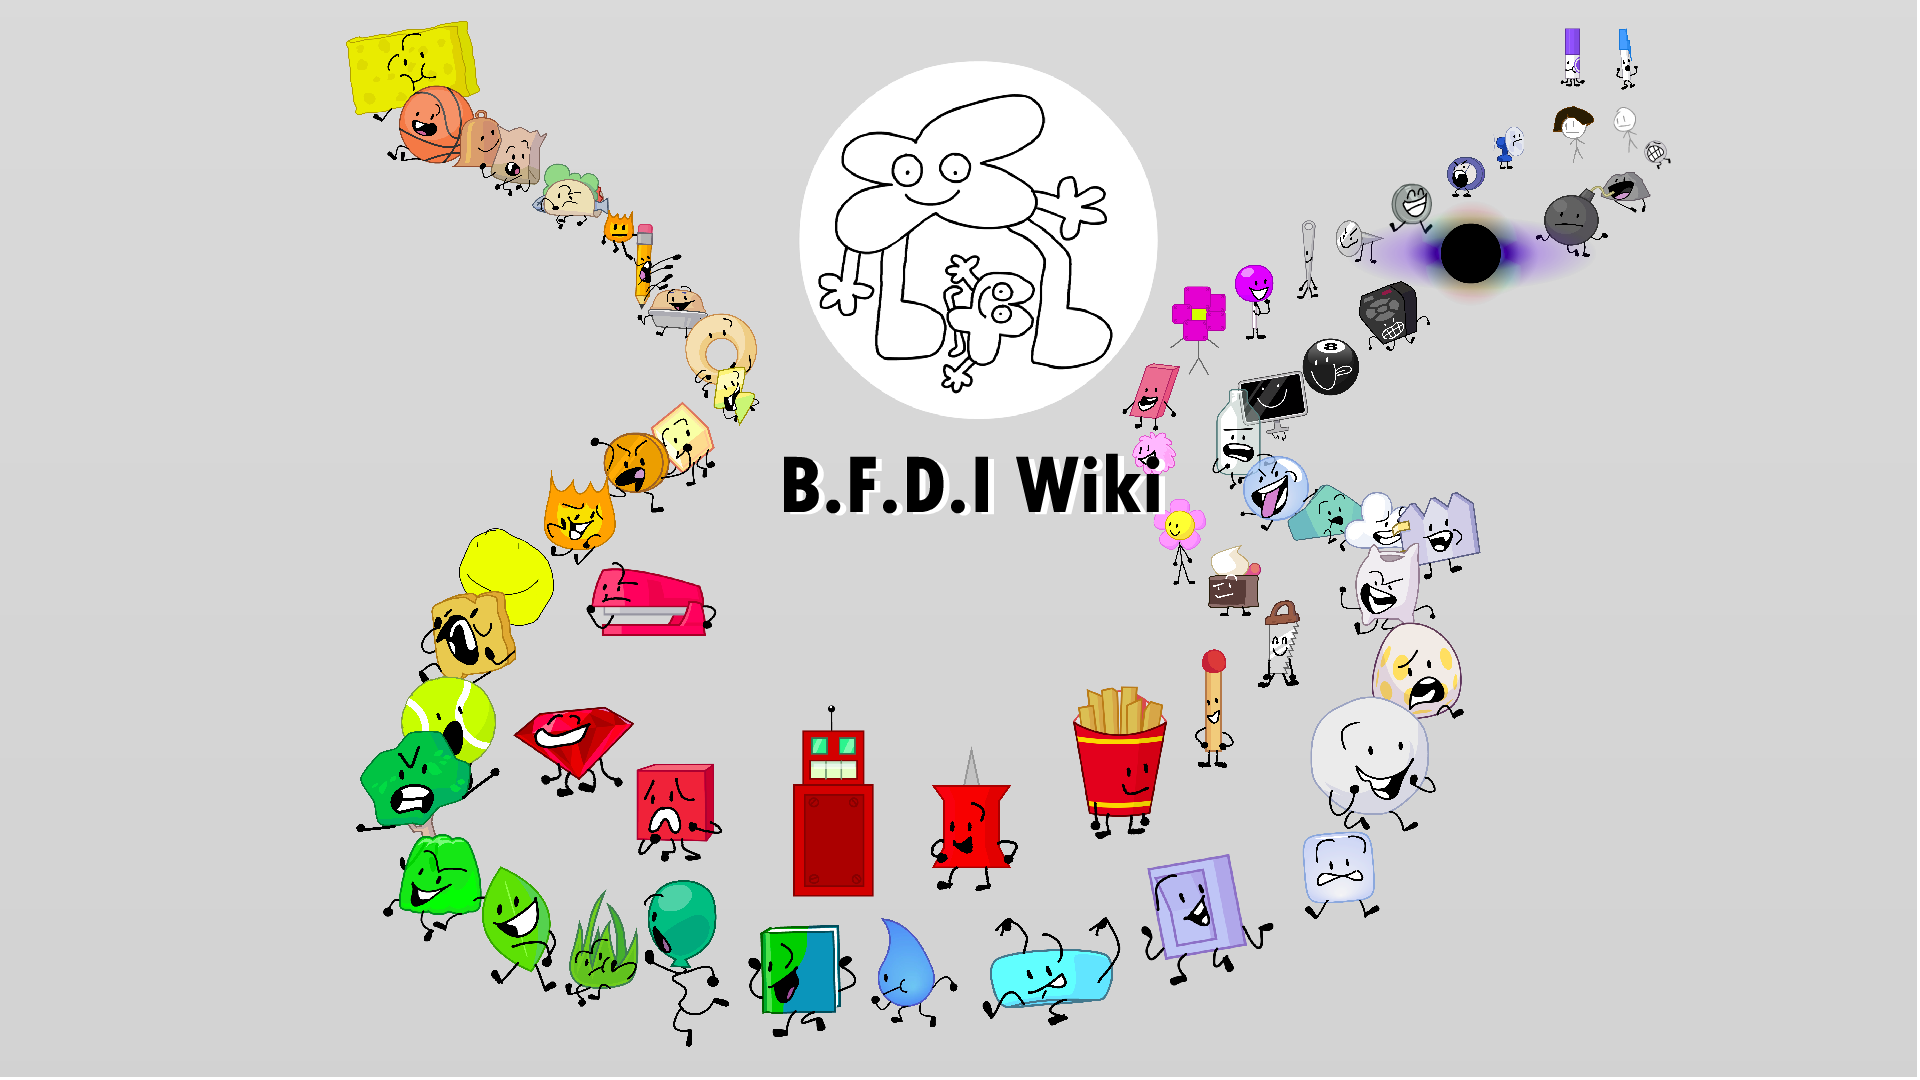 Battle For Dream Island Bfb Characters